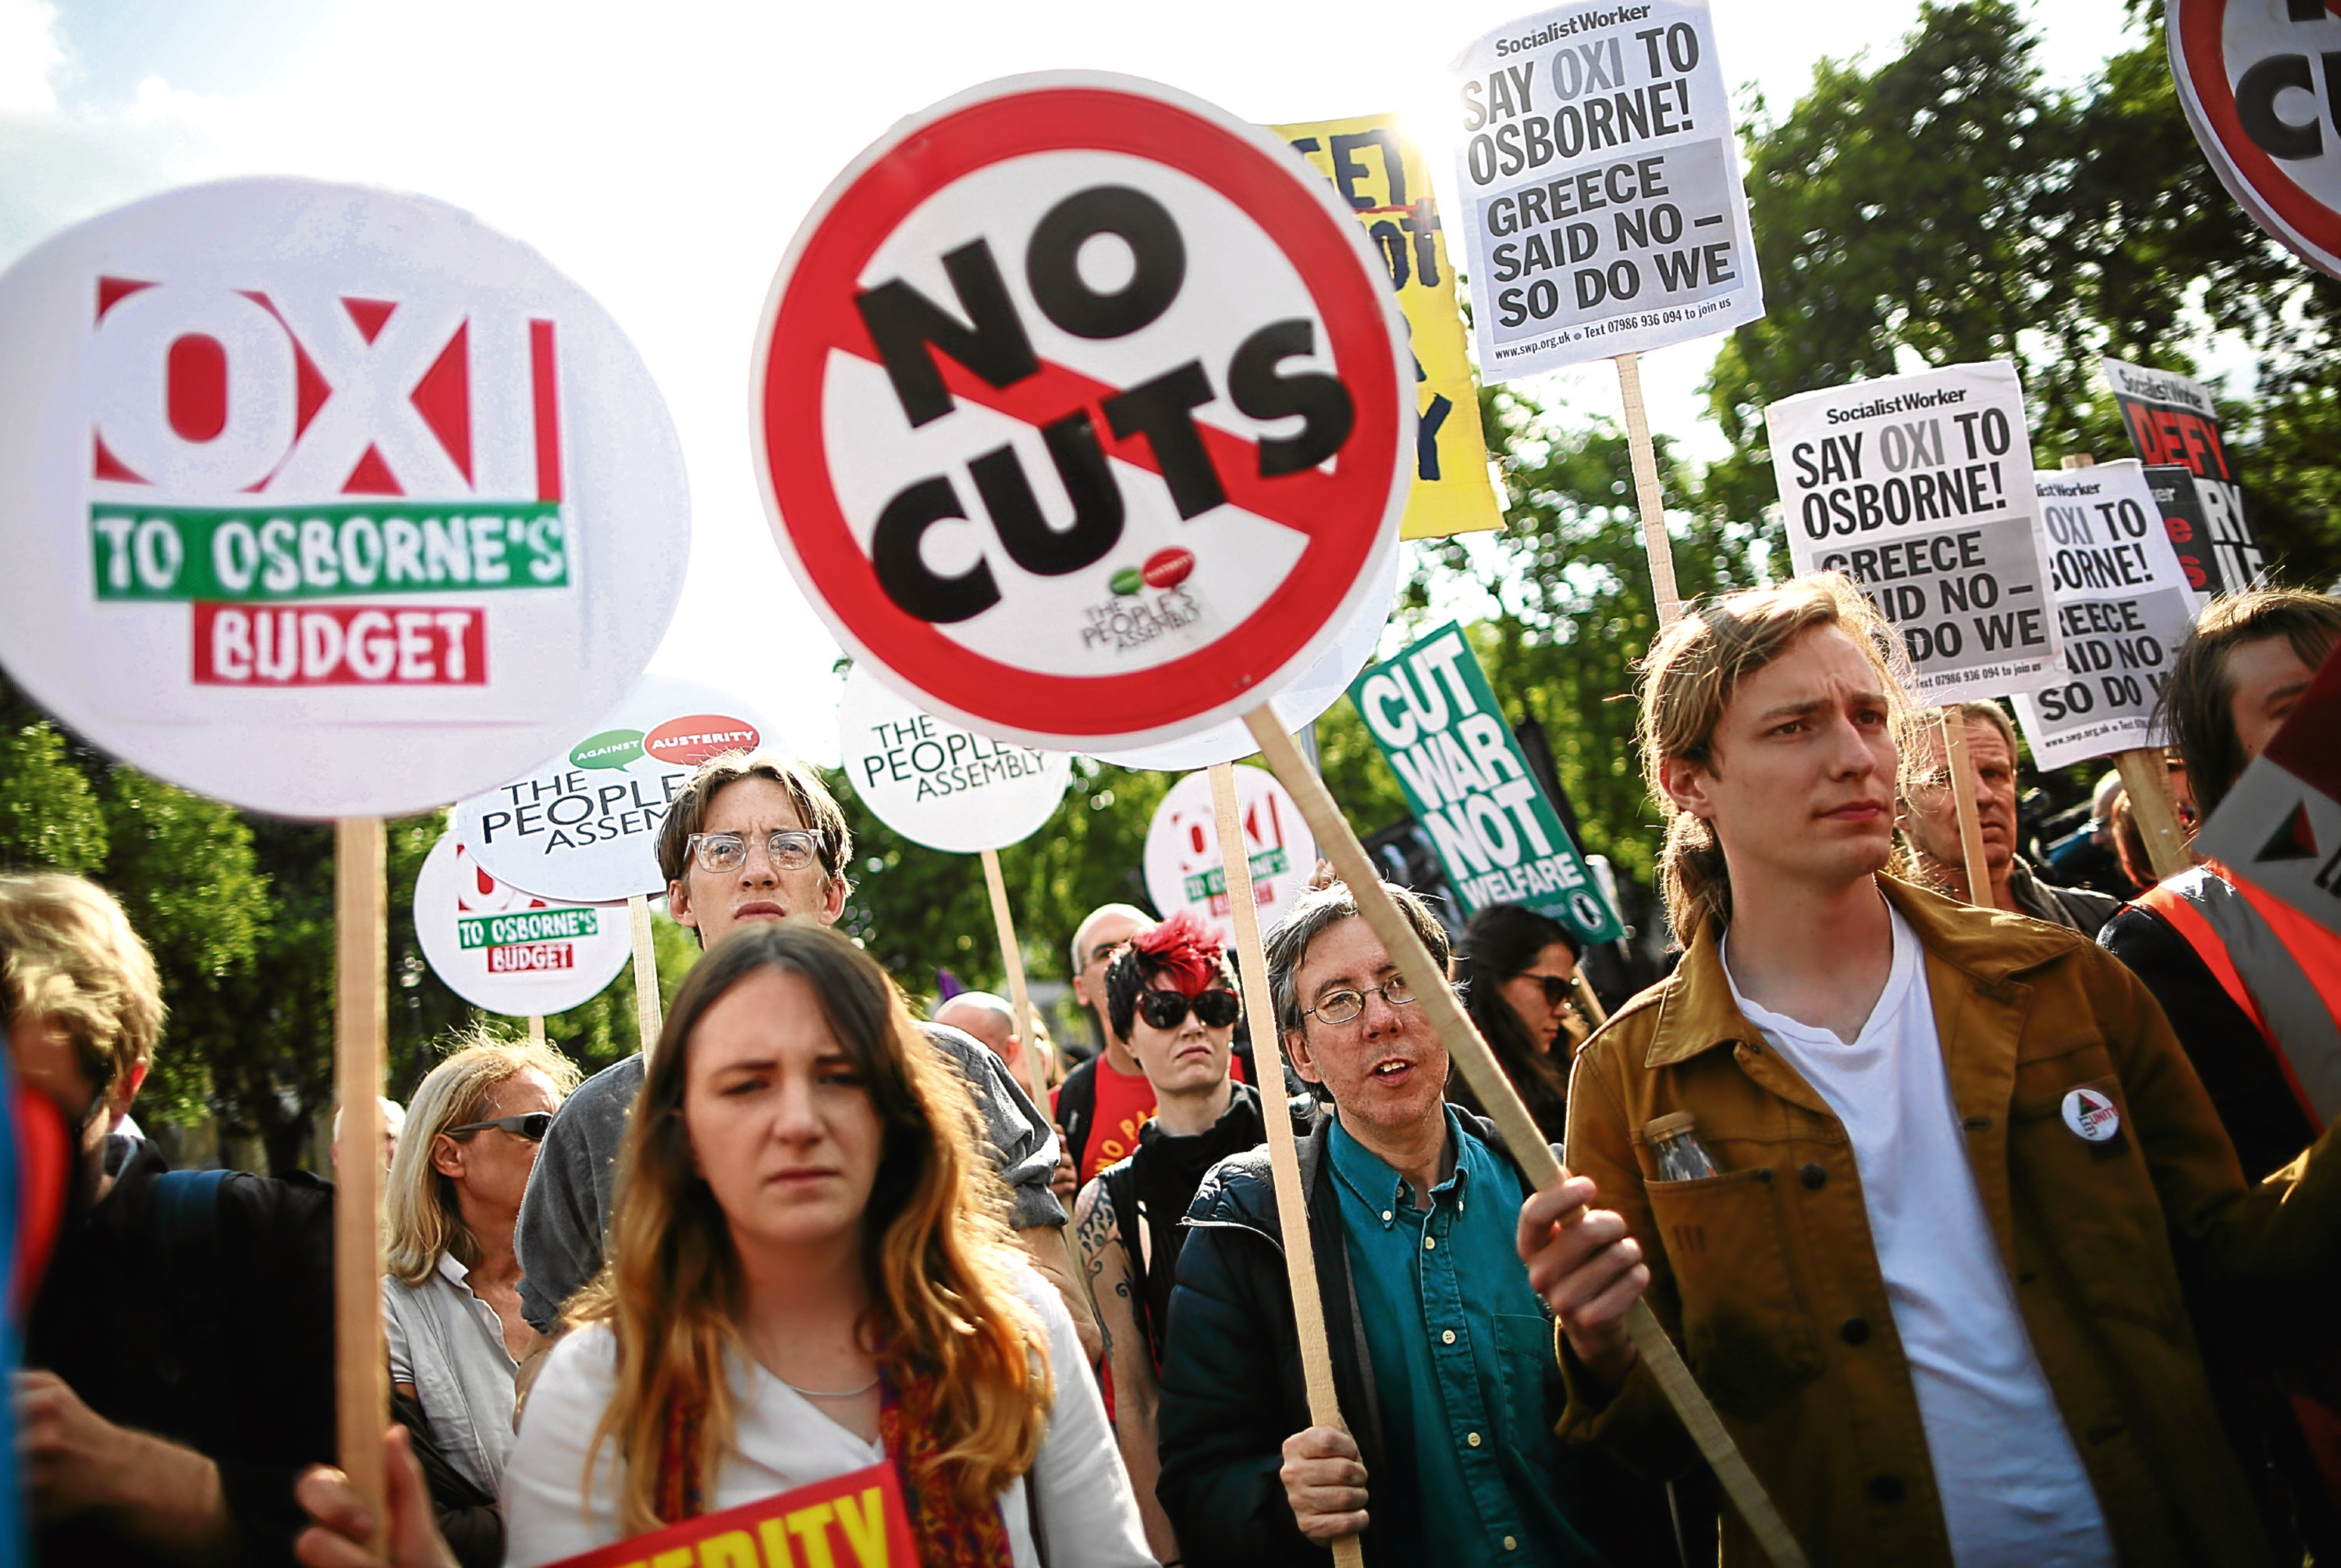 Protestors are seen outside the Houses of Parliament after the Chancellor of the Exchequer George Osborne delivered his Budget to the House on July 8, 2015 in London, (Dan Kitwood/Getty Images)